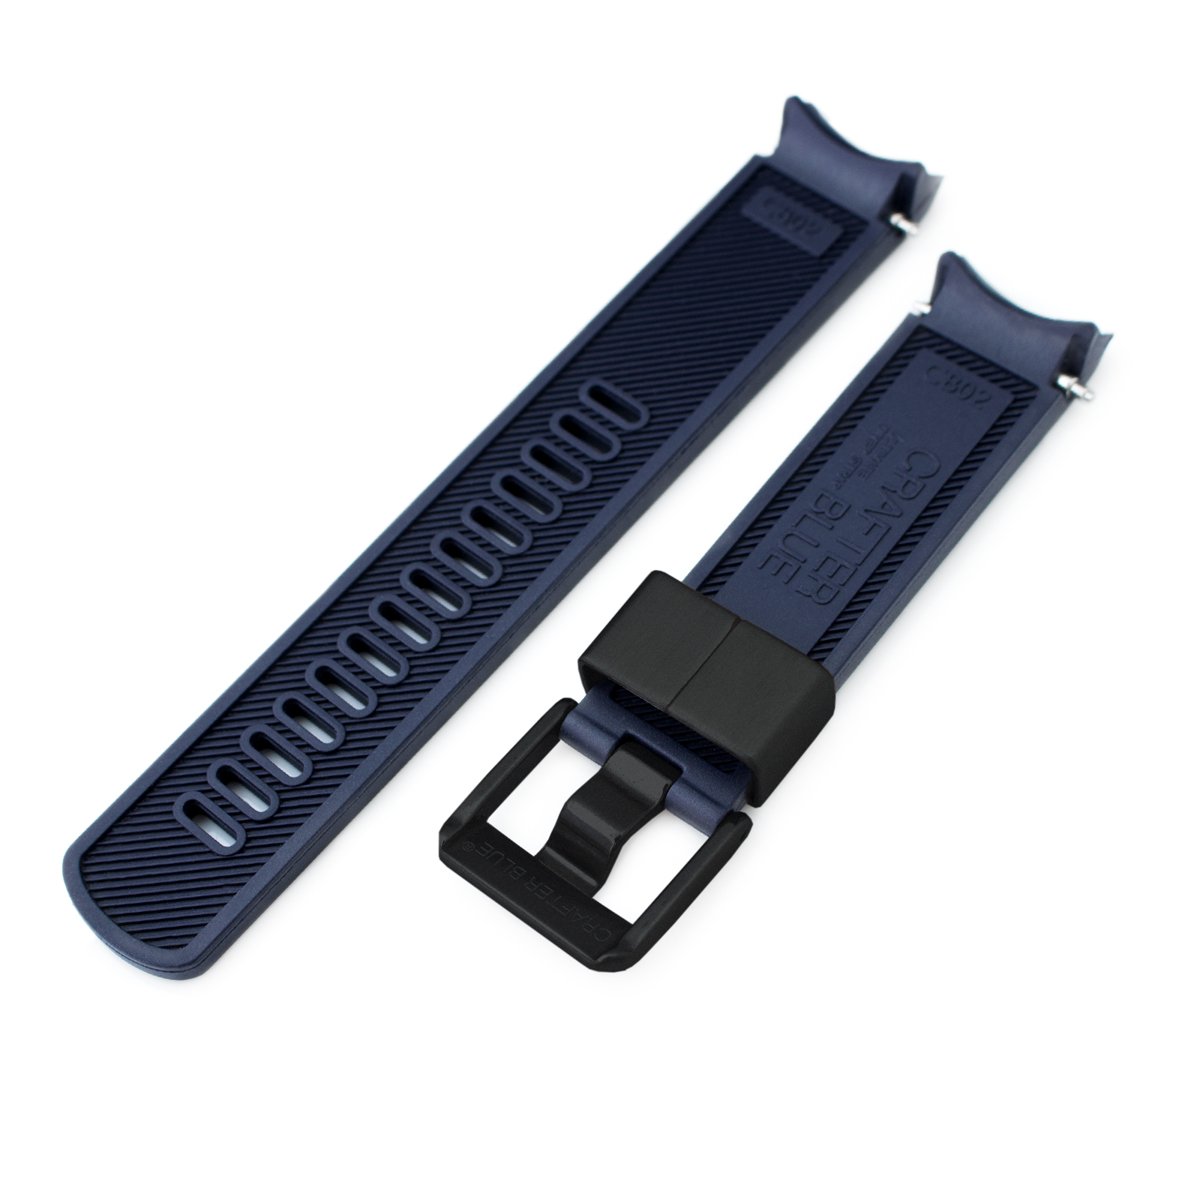 20mm Crafter Blue Navy Blue Rubber Curved Lug Watch Band for Seiko Sumo SBDC001 PVD Black Buckle Strapcode Watch Bands